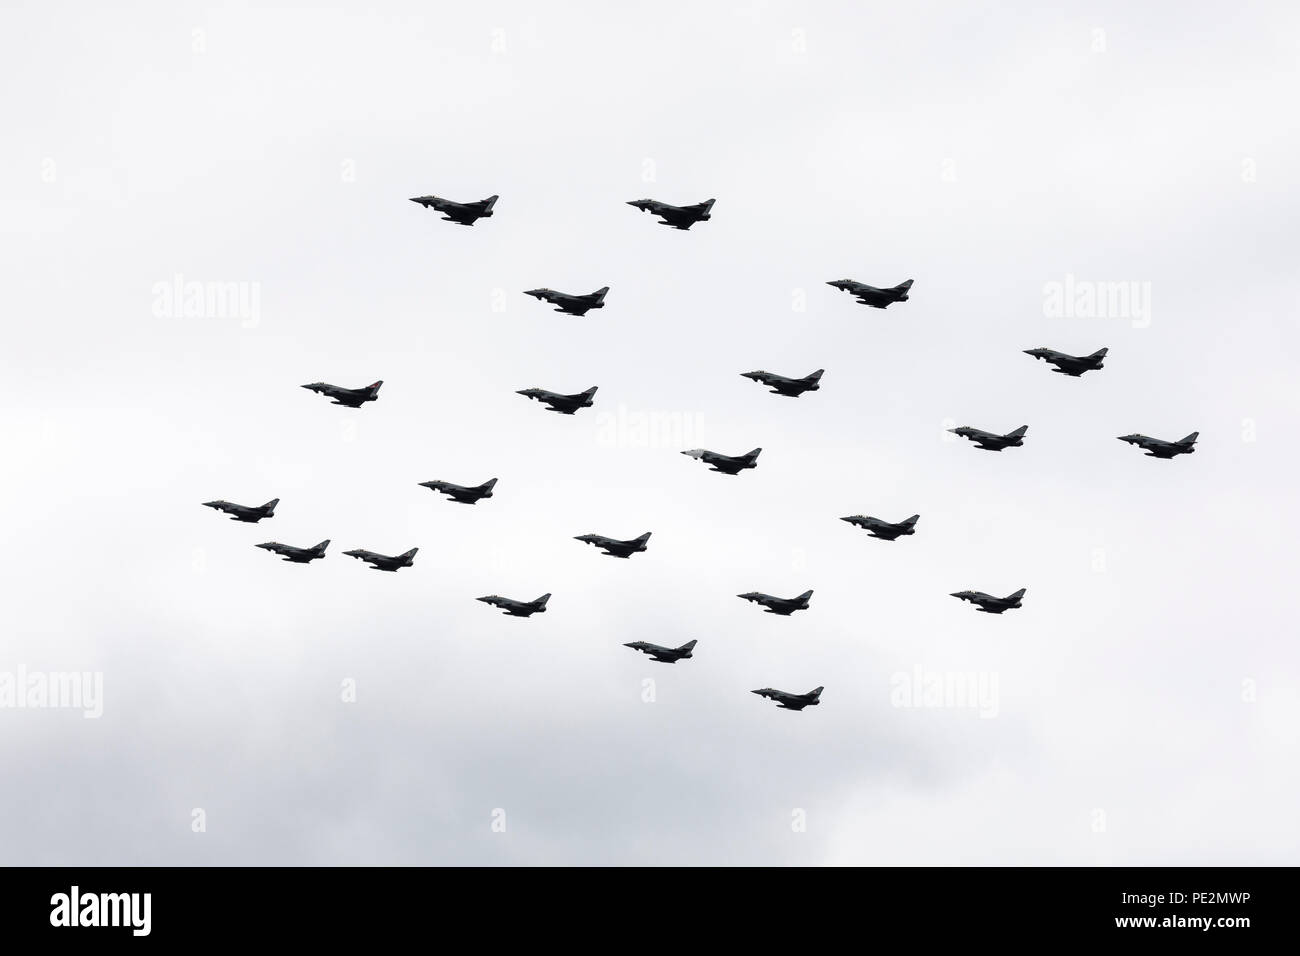 Many Eurofight Typhoon RAF fighter jets in formation over London for the RAF100 anniversary flypast Stock Photo